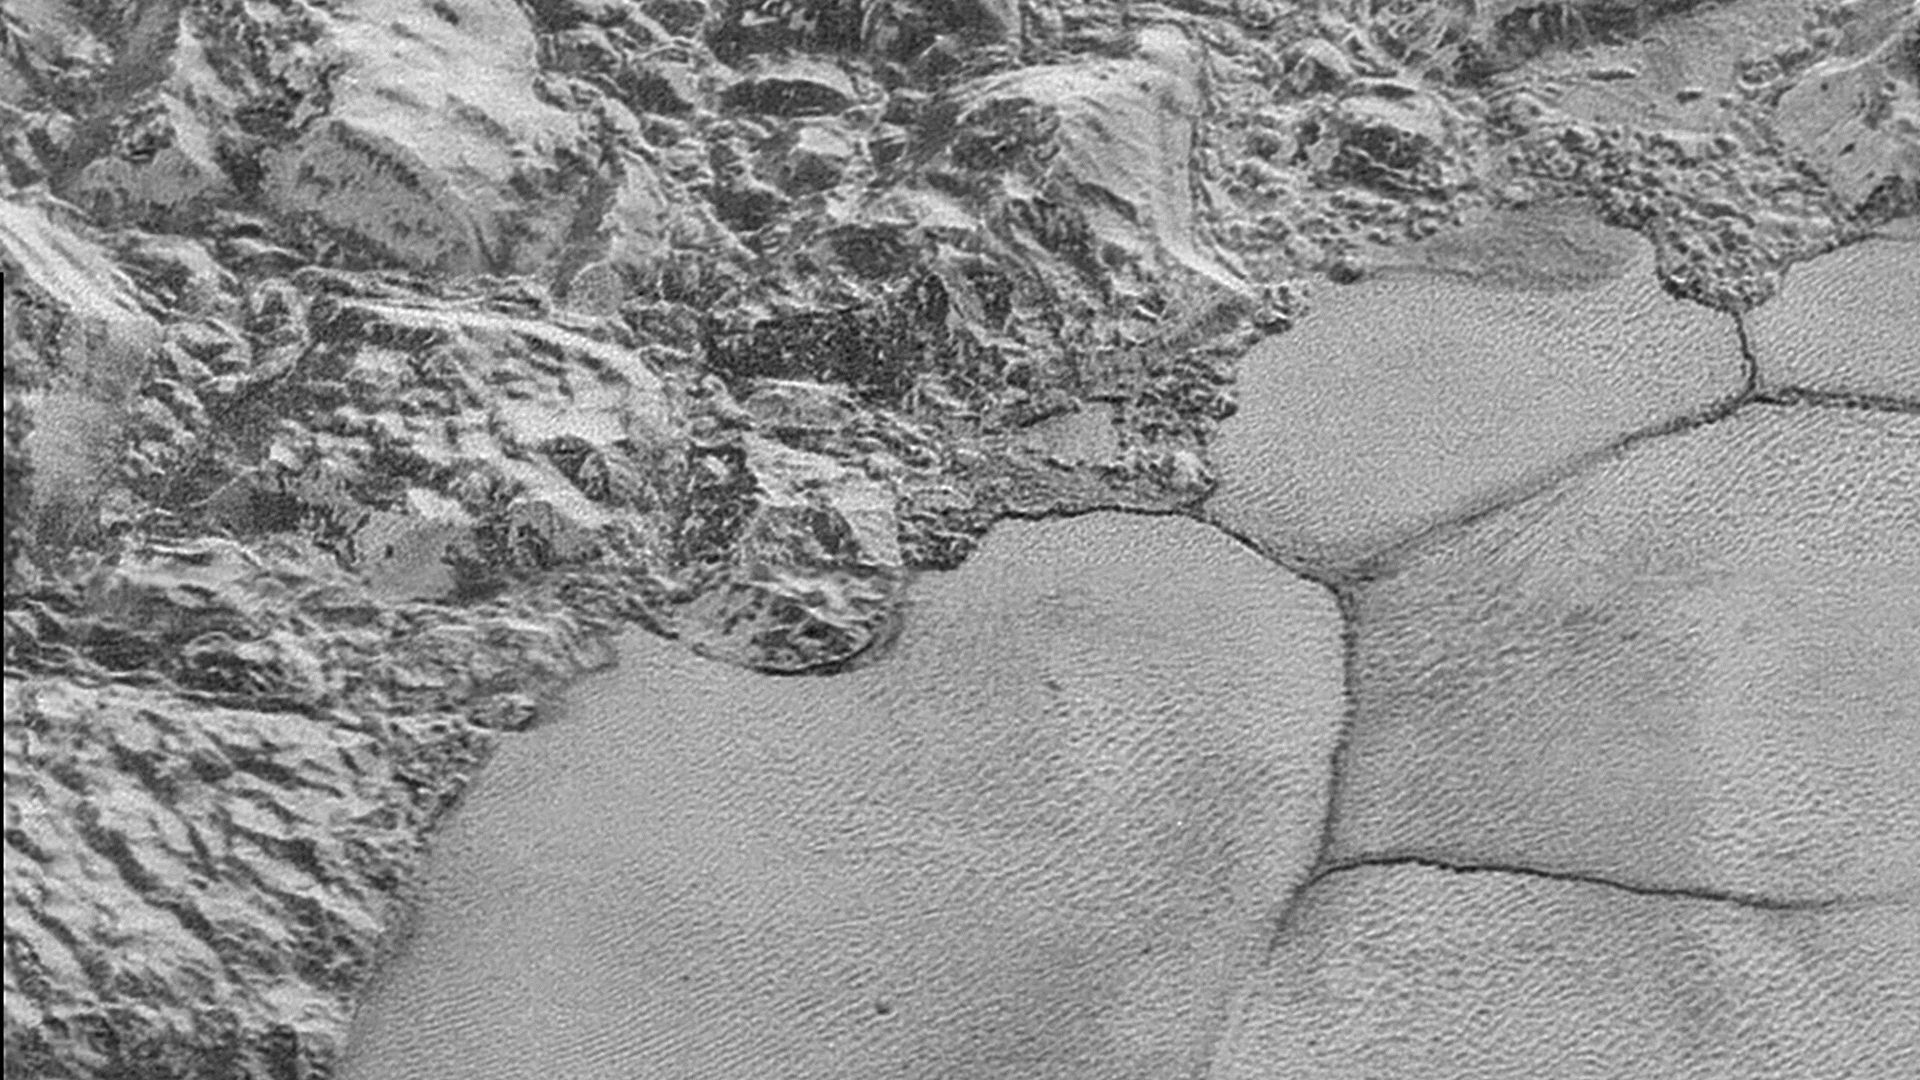 The mountain range on the edge of the Sputnik Planitia ice plain, with dune formations in the bottom half of the picture.